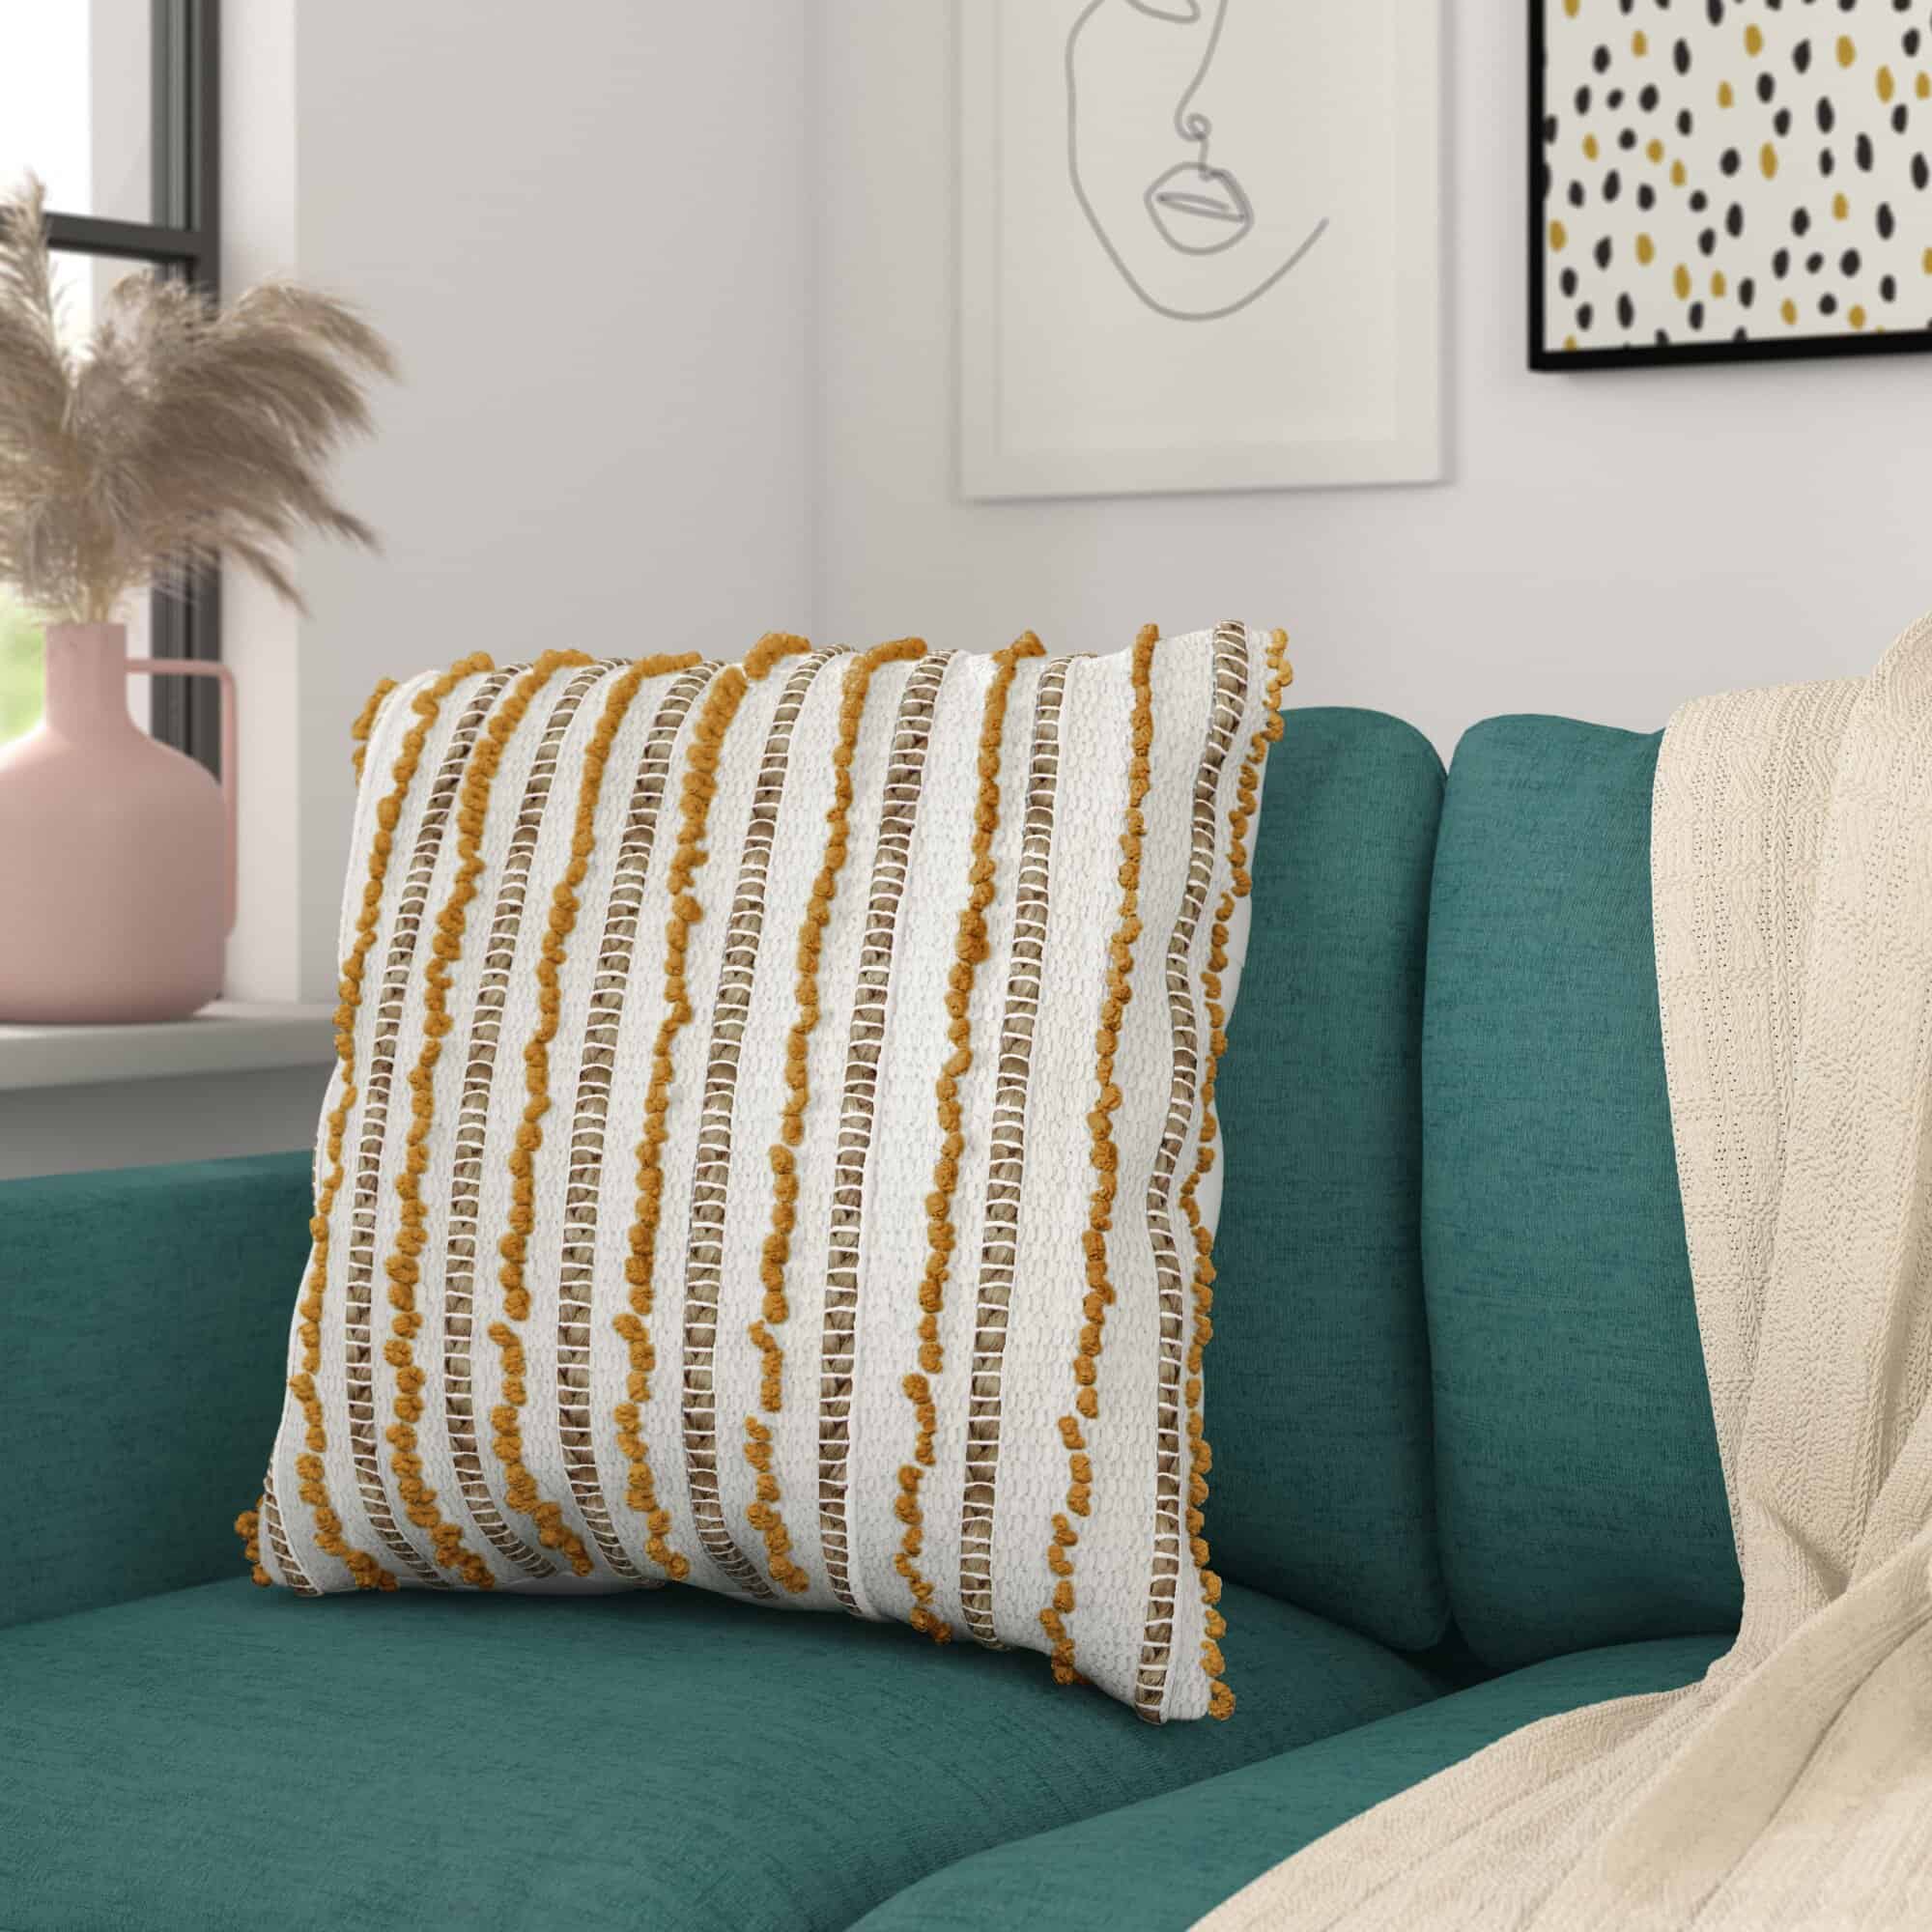 Striped Throw Pillows Are A Must Have